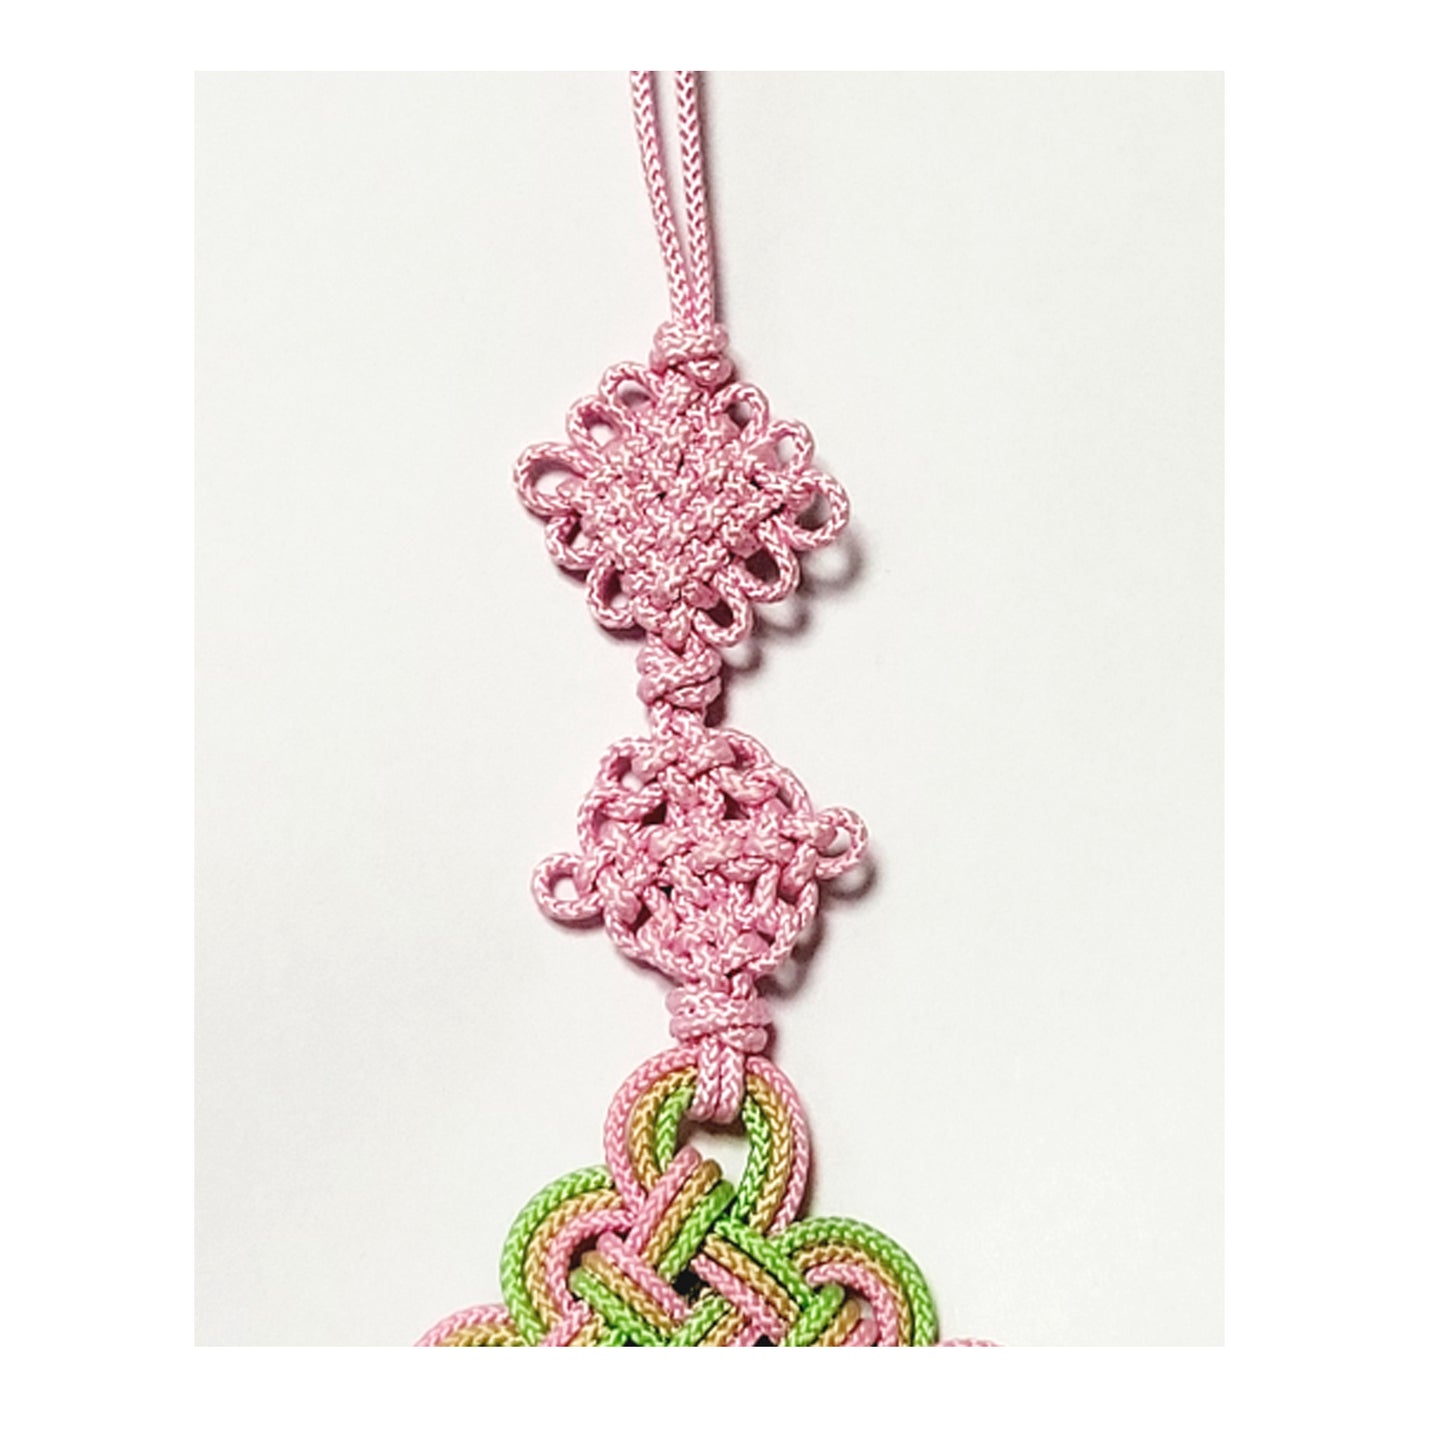 Korea traditional Knot in the center of keyring